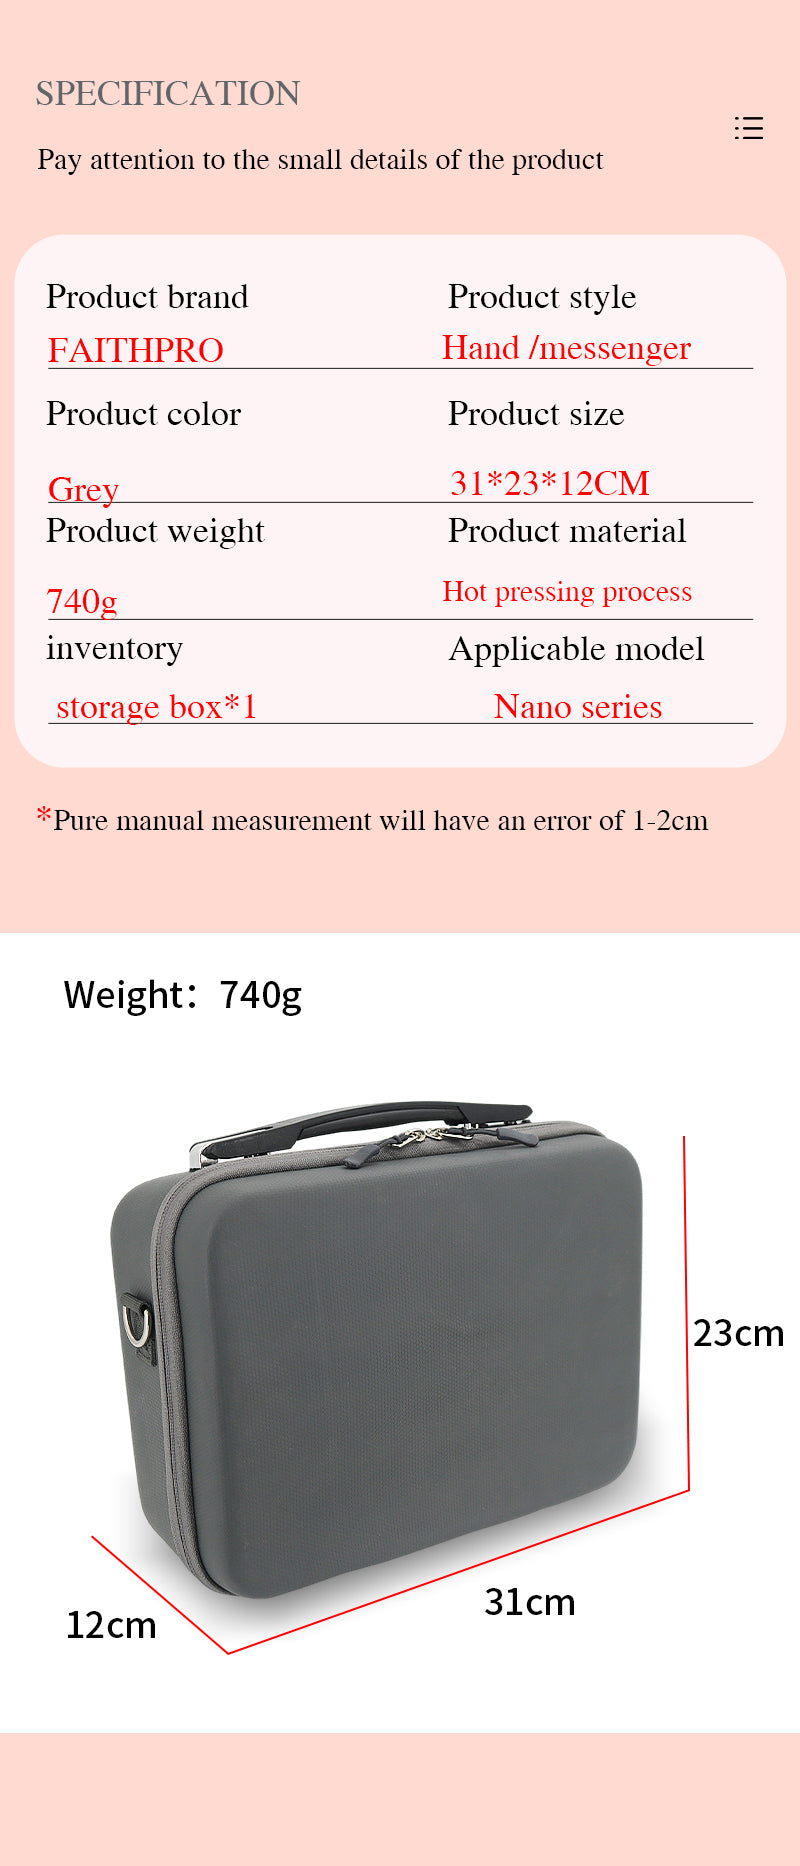 evo nano box specification and weight